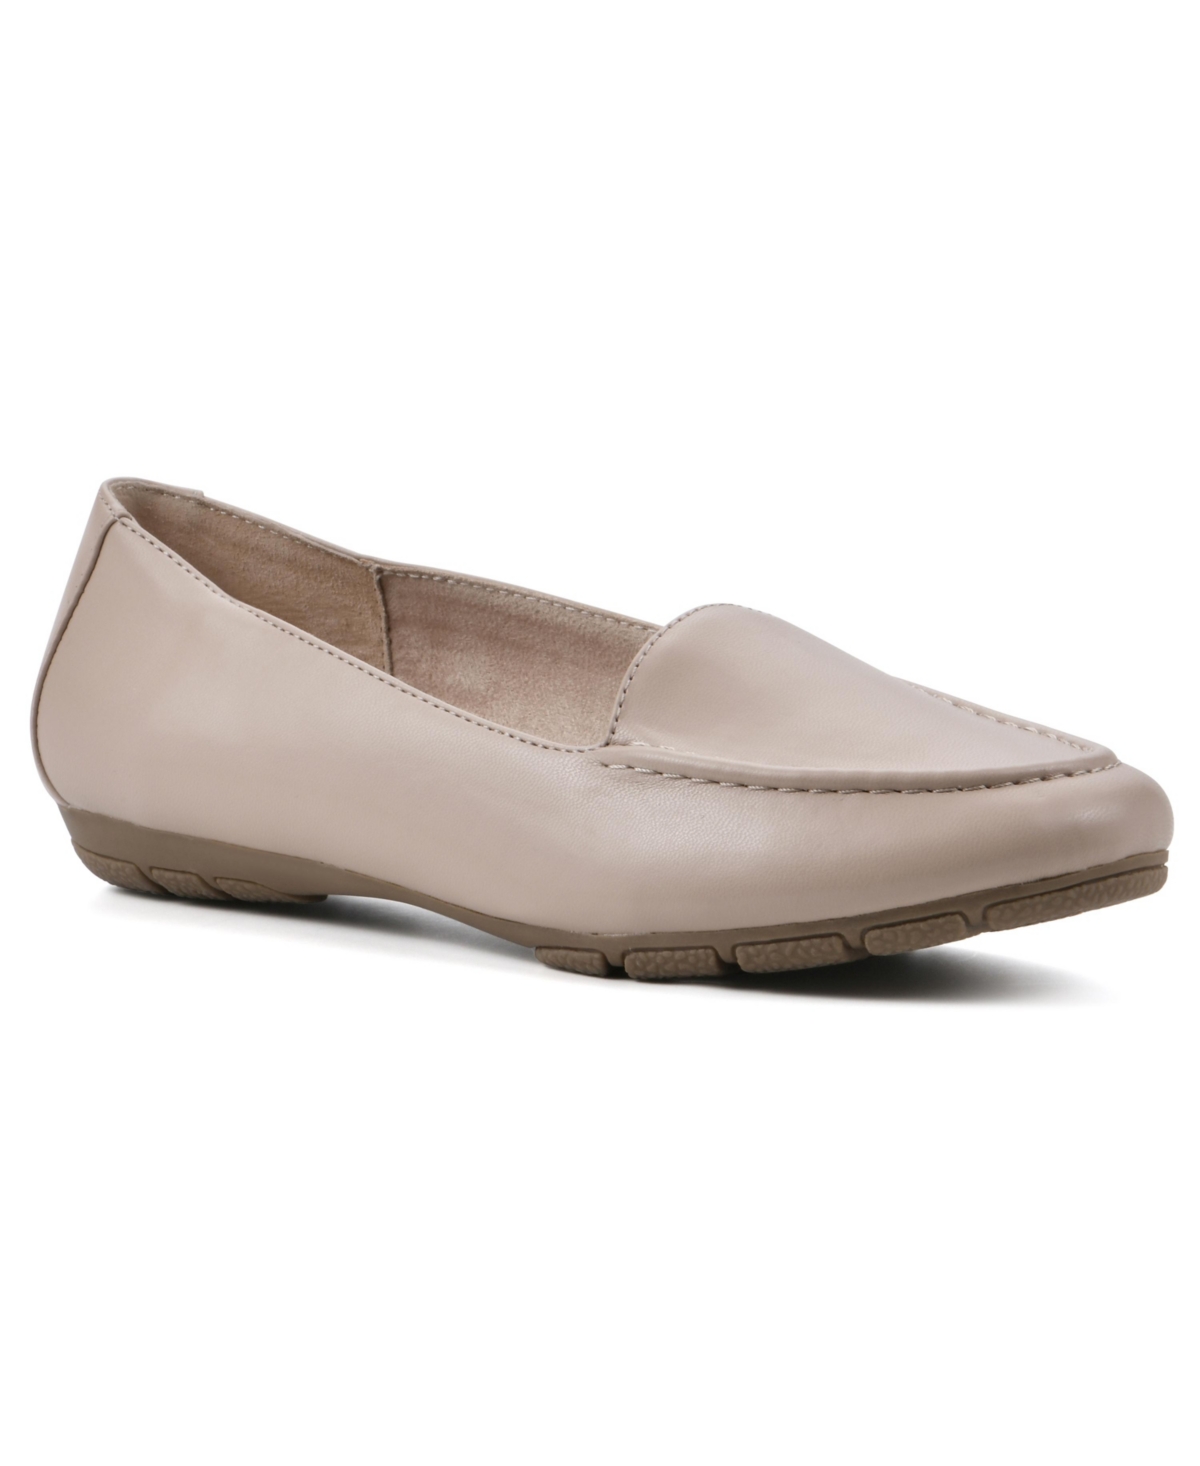 Women's Gracefully Flats - Light Taupe, Smooth